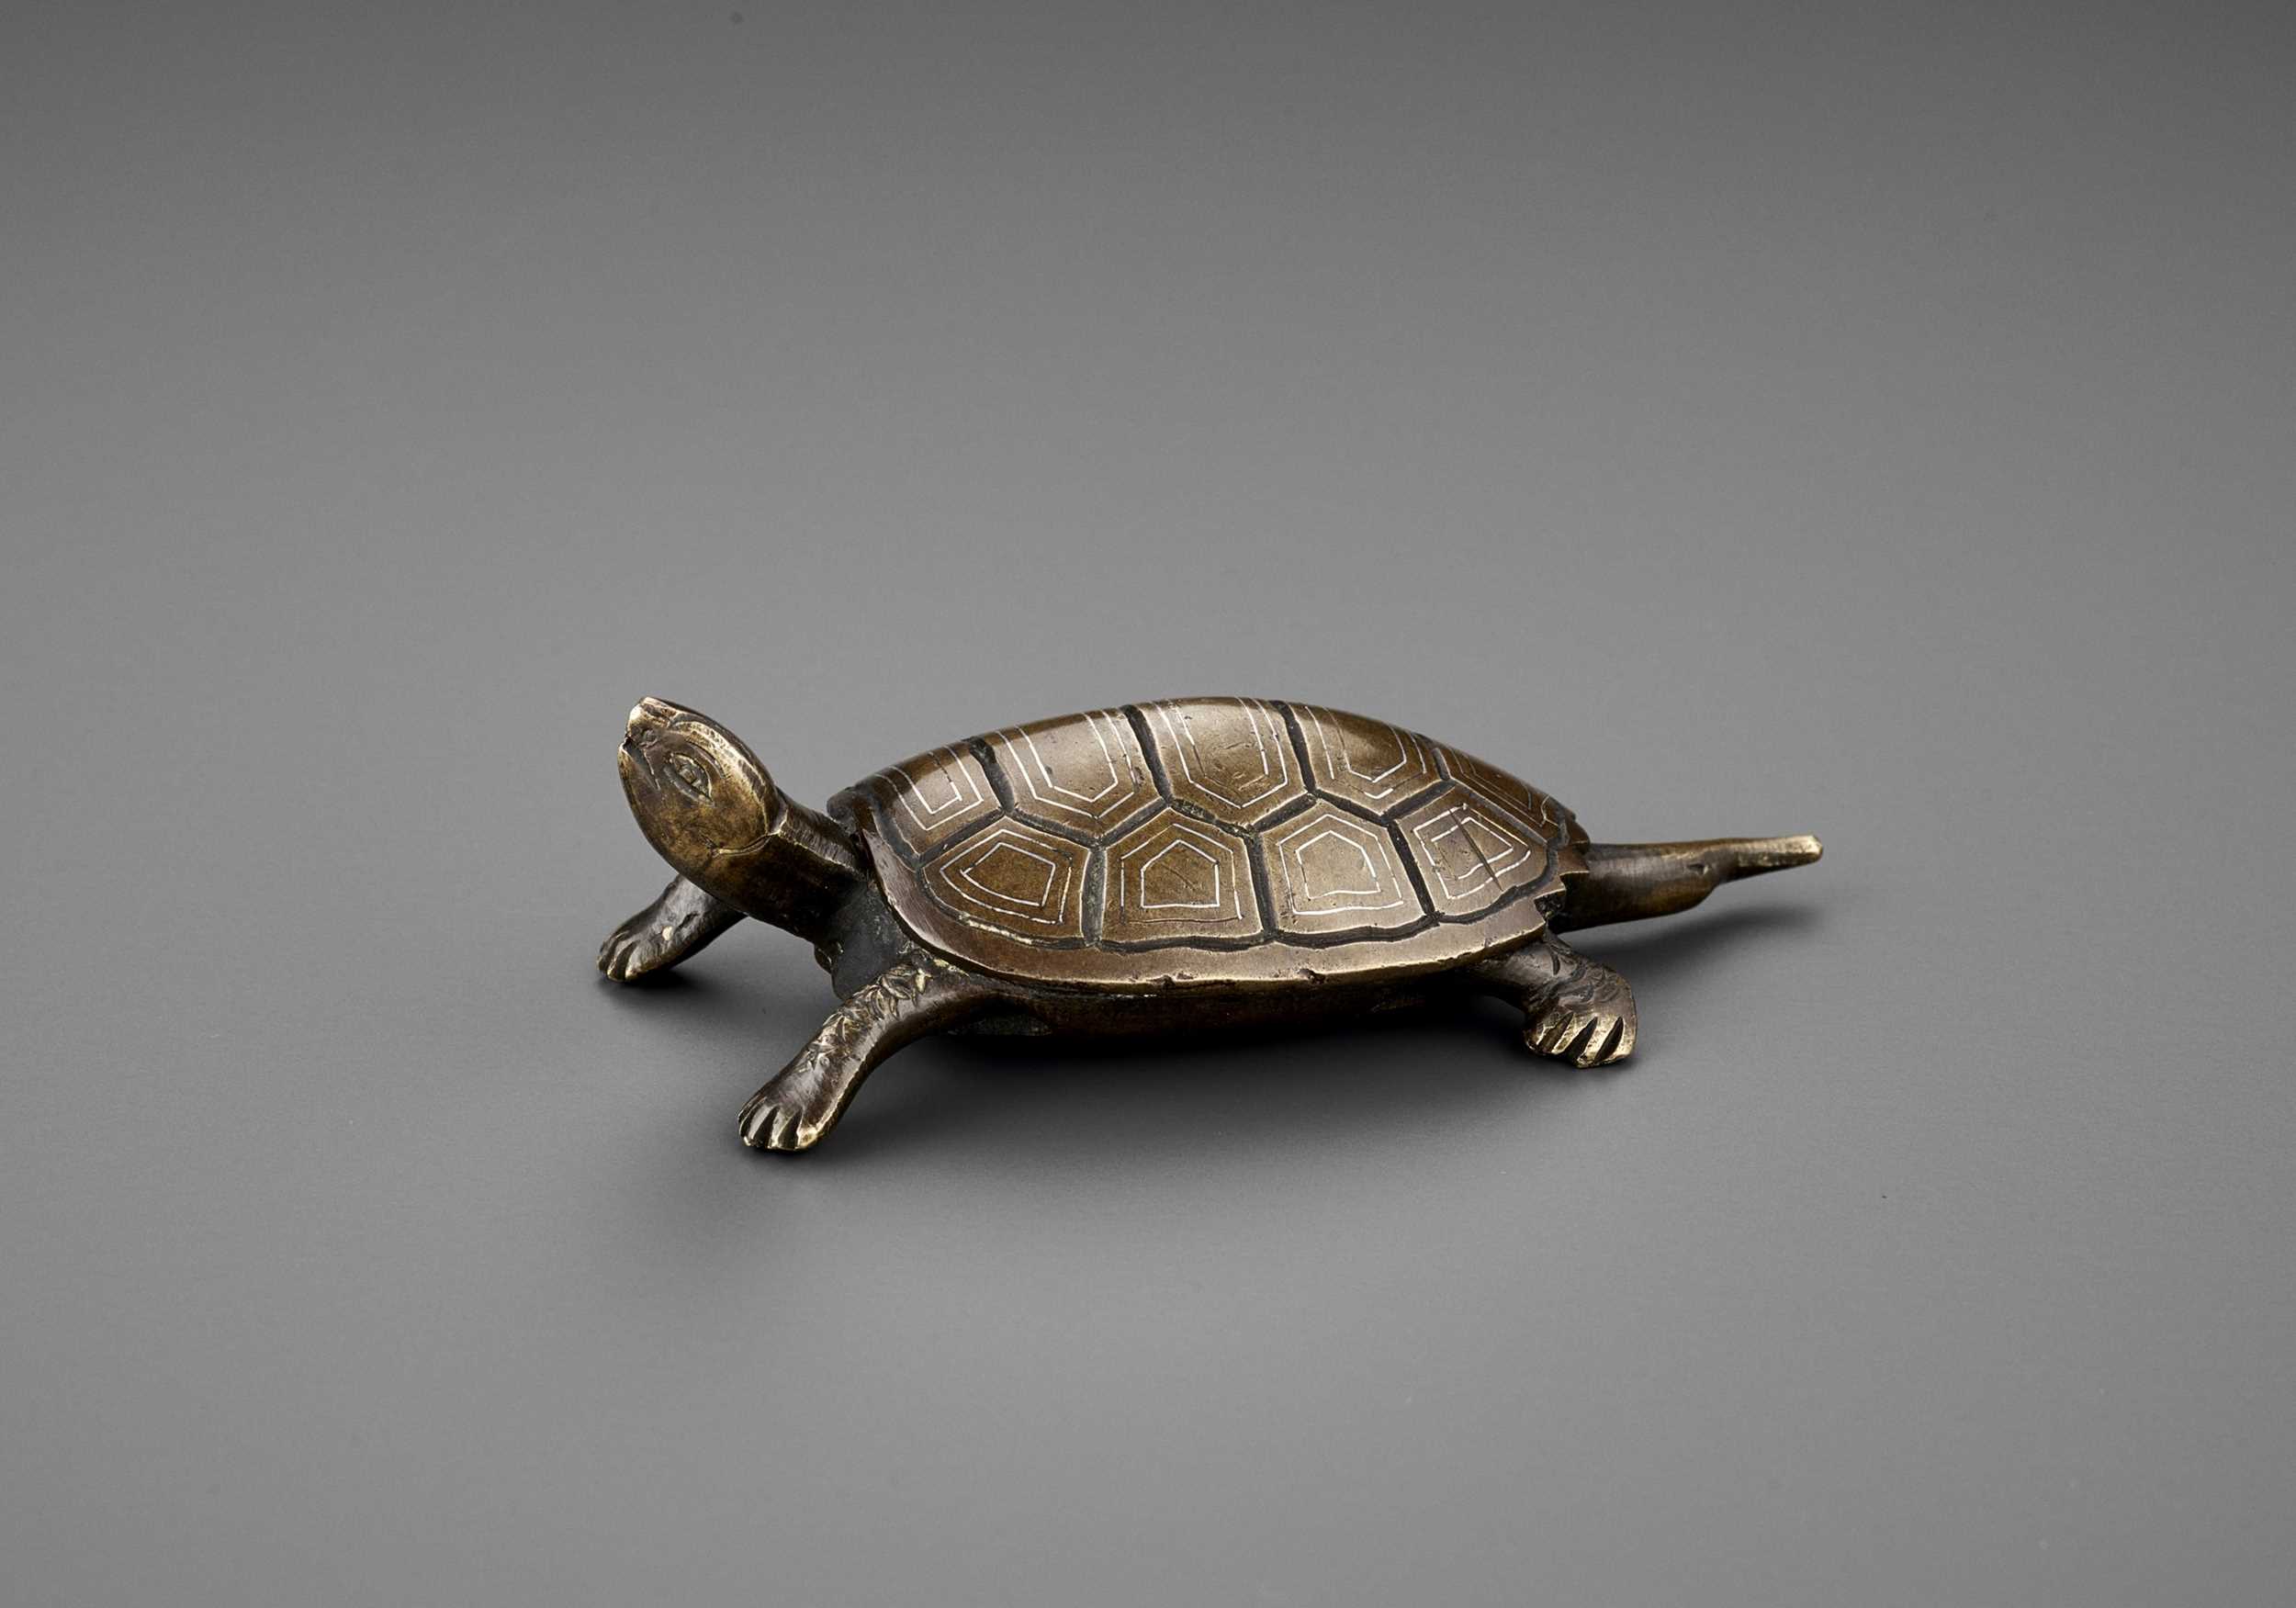 Lot 346 - A SILVER-INLAID BRONZE ‘TURTLE’ WEIGHT, ATTRIBUTED TO SHISOU, LATE MING DYNASTY